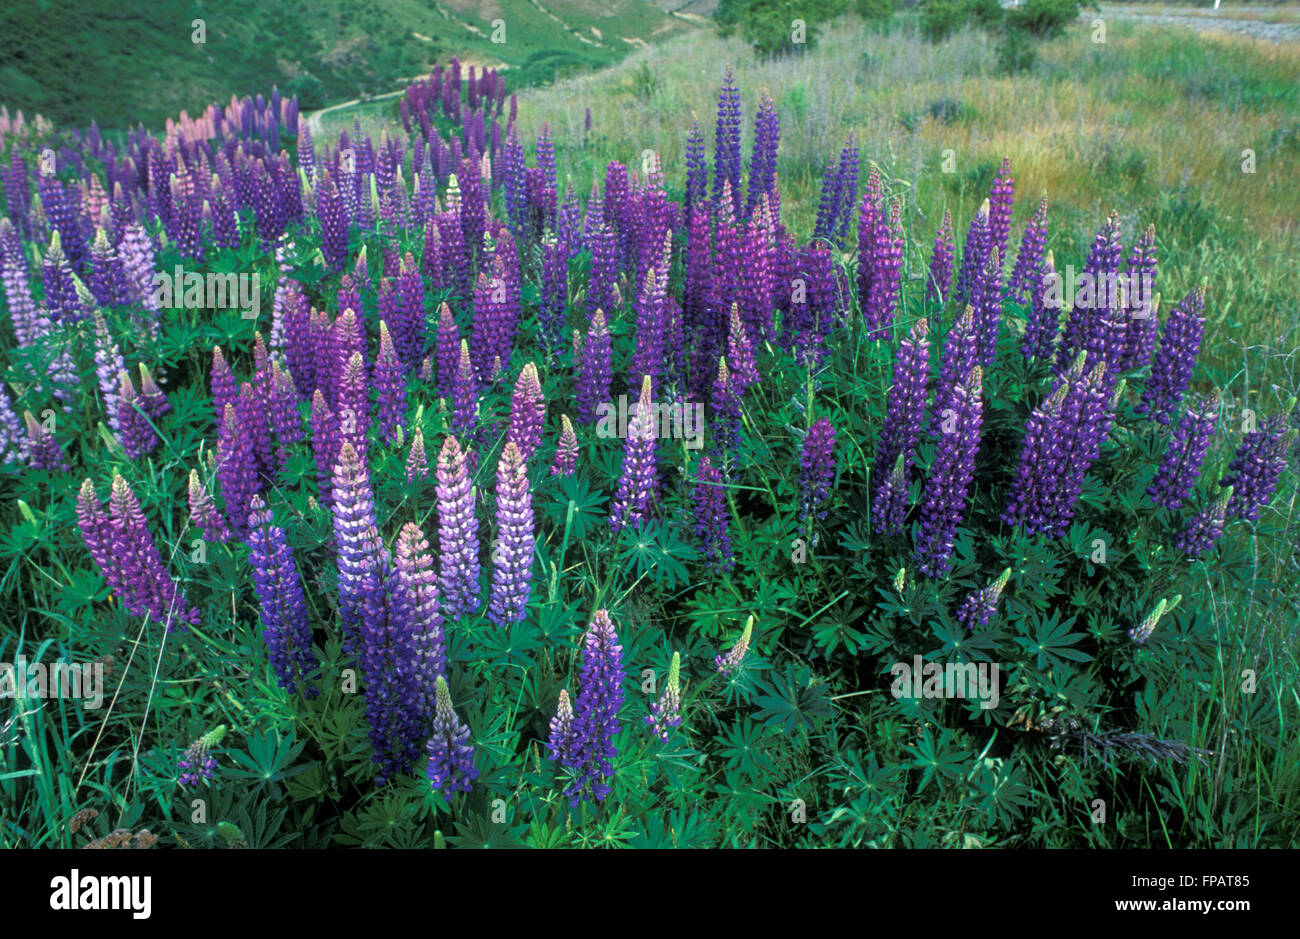 GARDEN BED OF PURPLE LUPINUS POLYPHYLLUS (LUPINS) Stock Photo